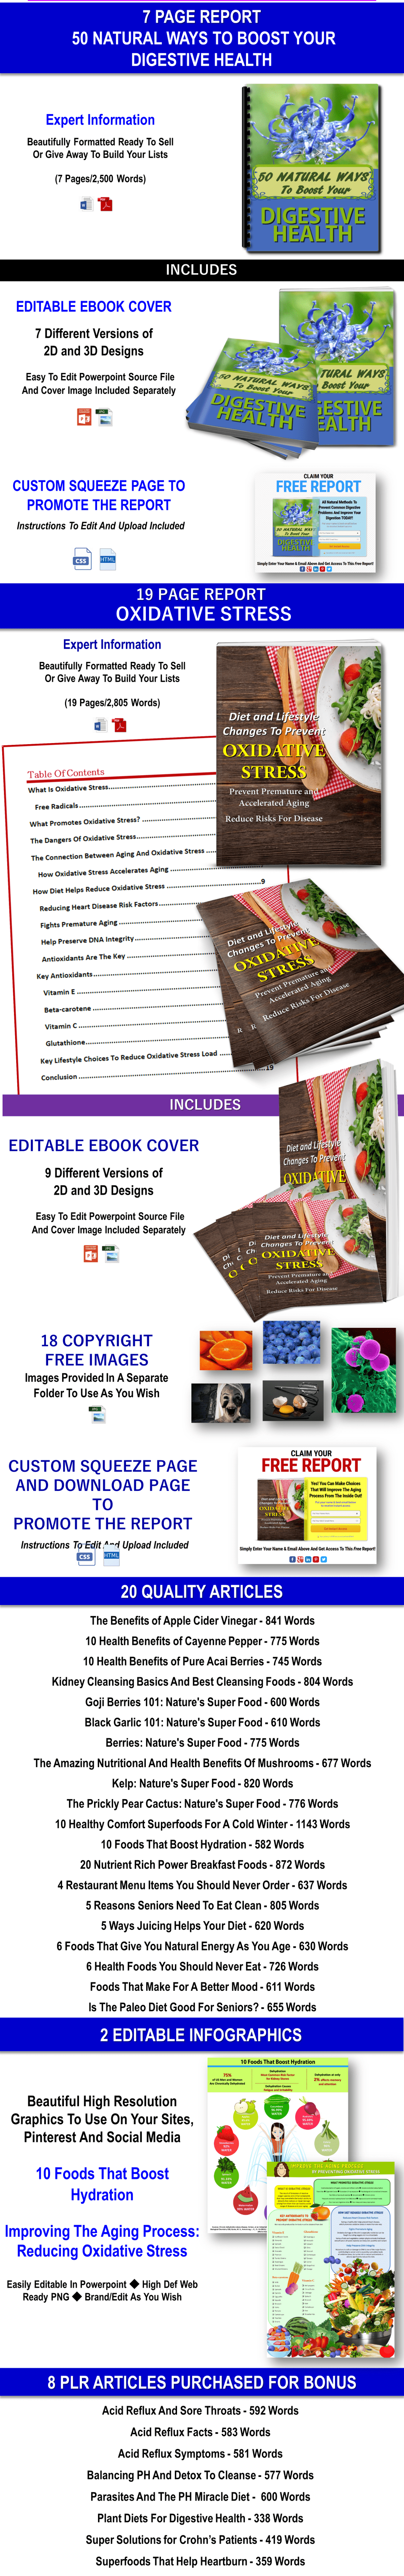 COLON CLEANSE, FASTING CLEANSE AND MORE DETOX CONTENT PLR Rights